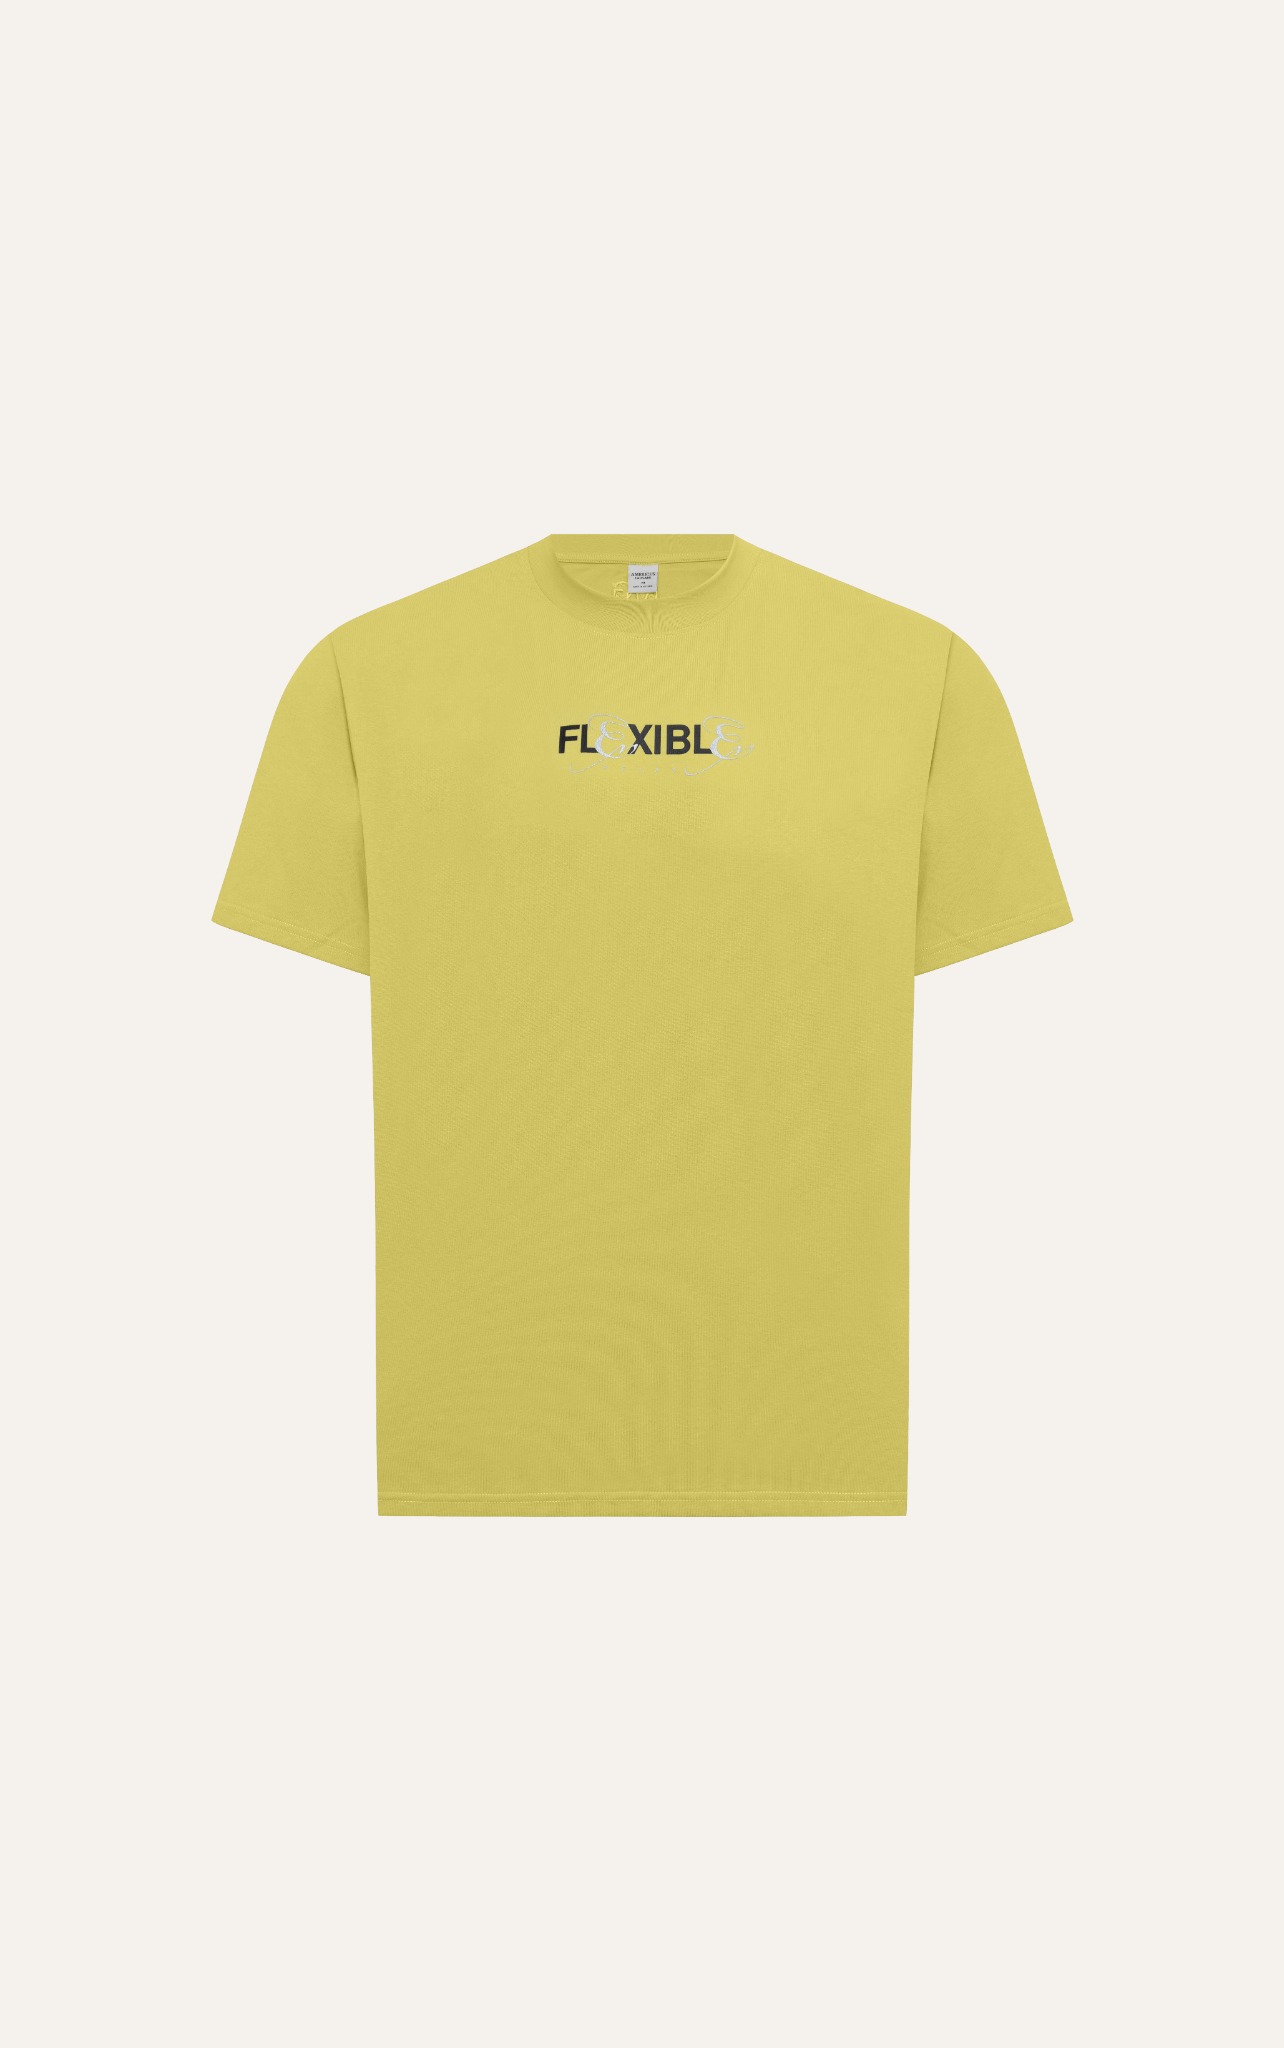 AG91 FACTORY OVERSIZE NEW PRINTED "FLEXIBLE" T-SHIRT - YELLOW